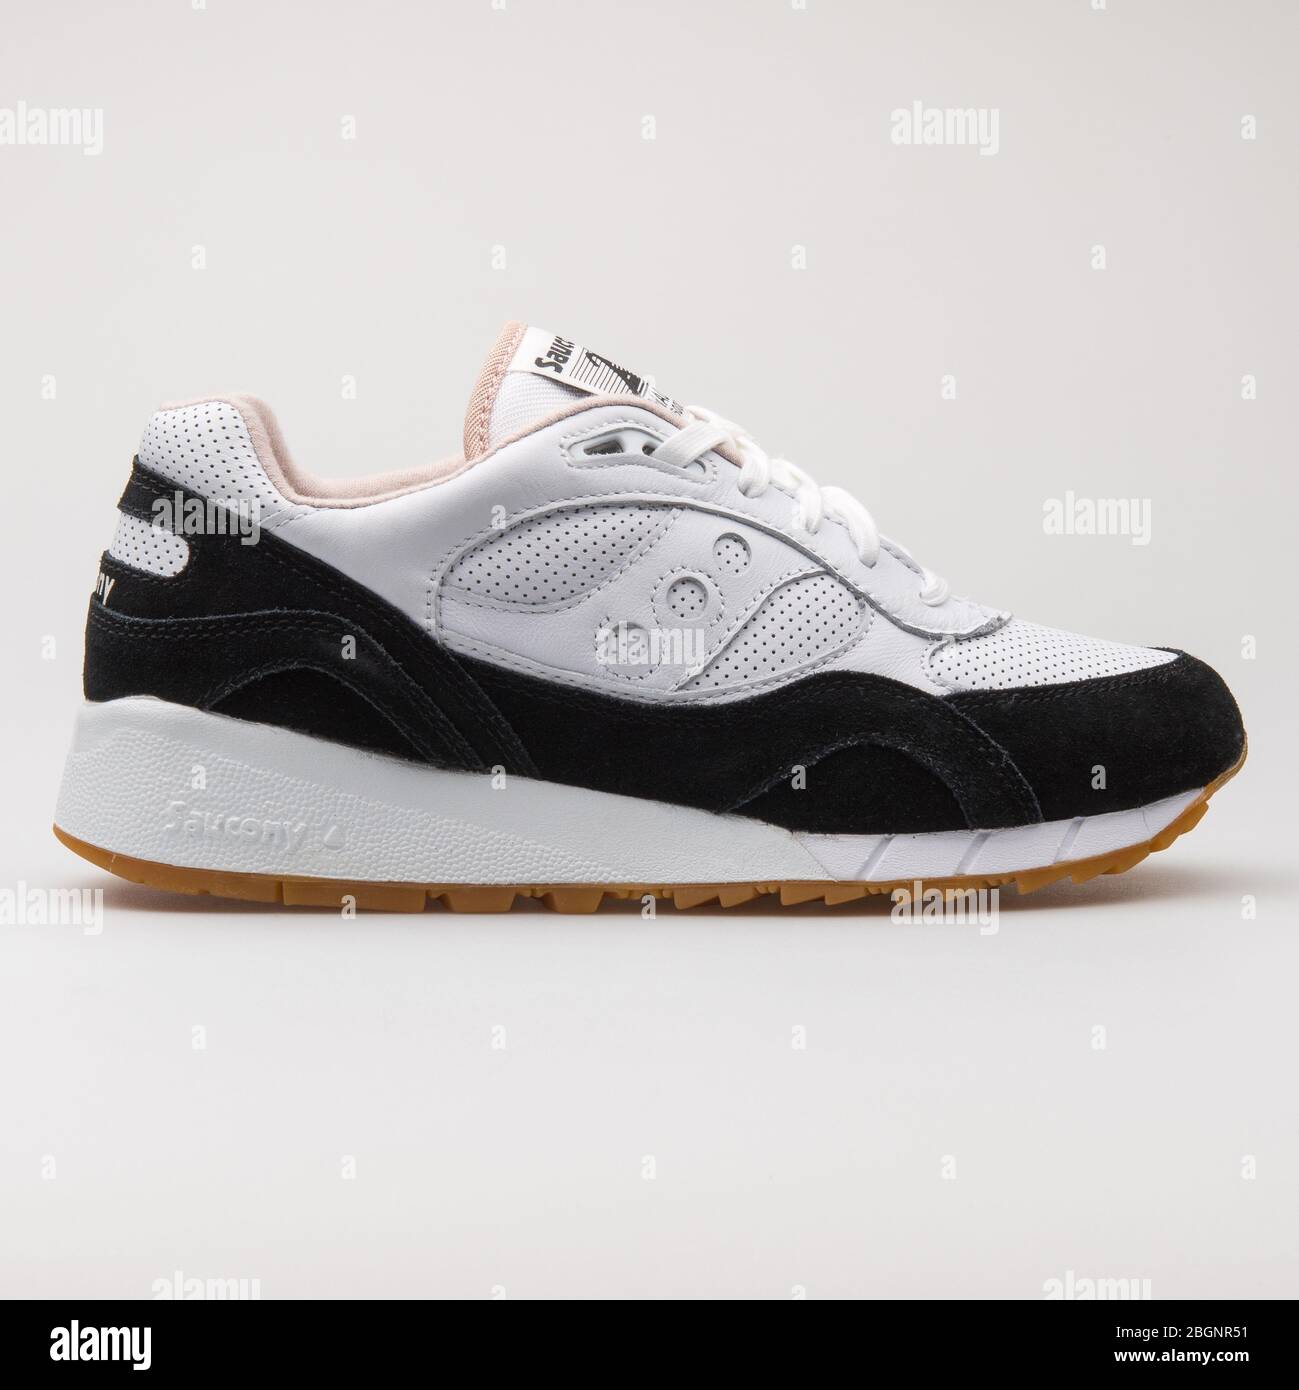 VIENNA, AUSTRIA - AUGUST 22, 2017: Saucony Shadow 6000 HT white and black  sneaker on white background Stock Photo - Alamy